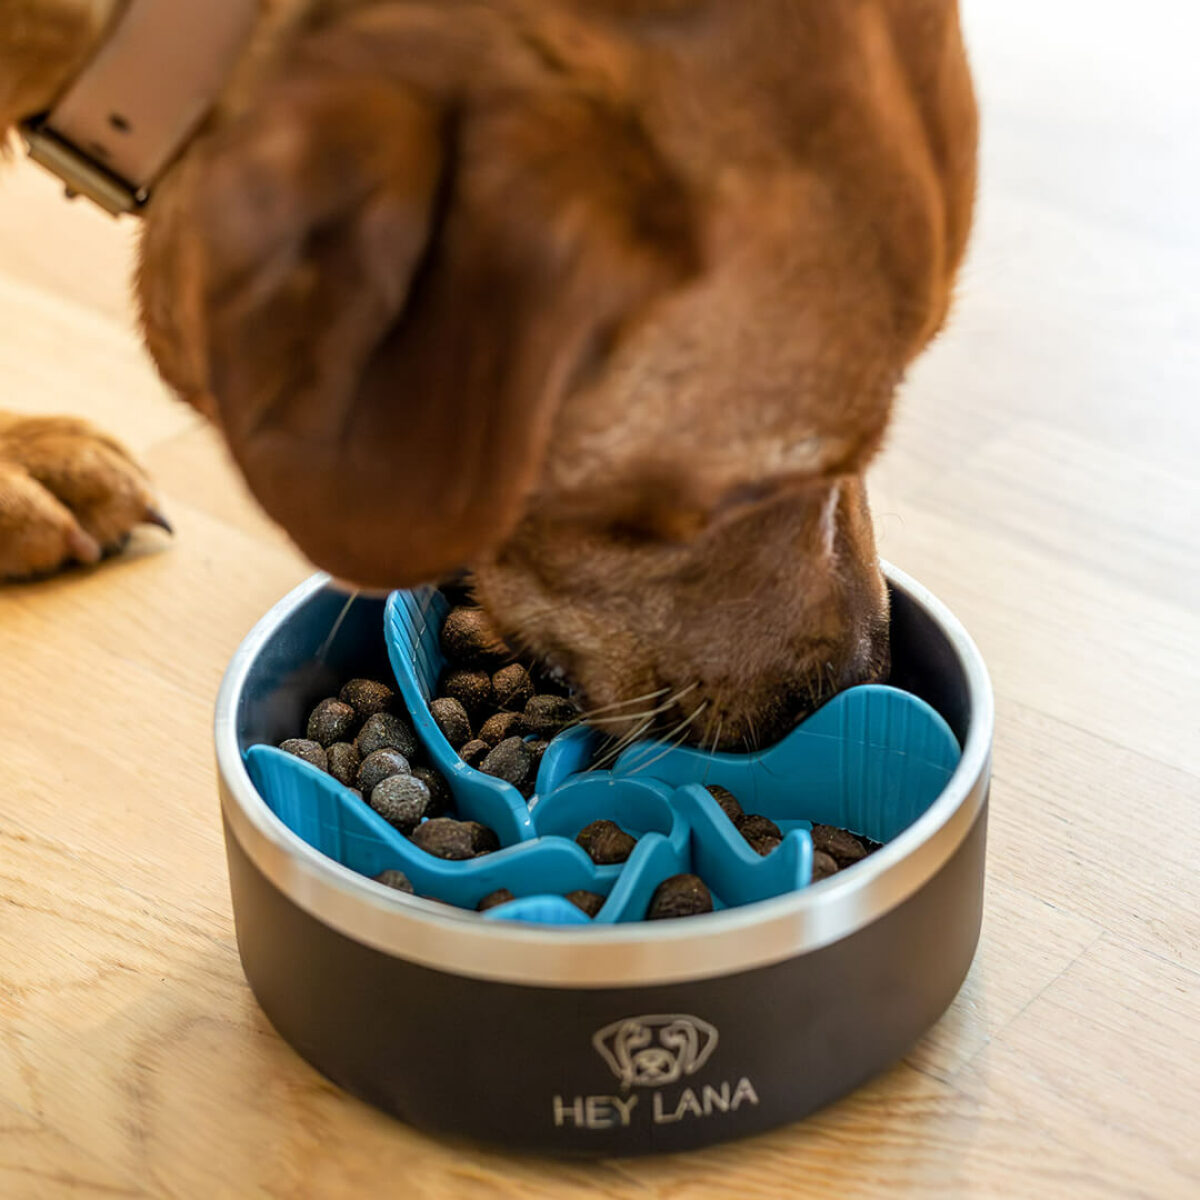 Dog eats with gourmet brake - Anti-snare insert for dog food bowl